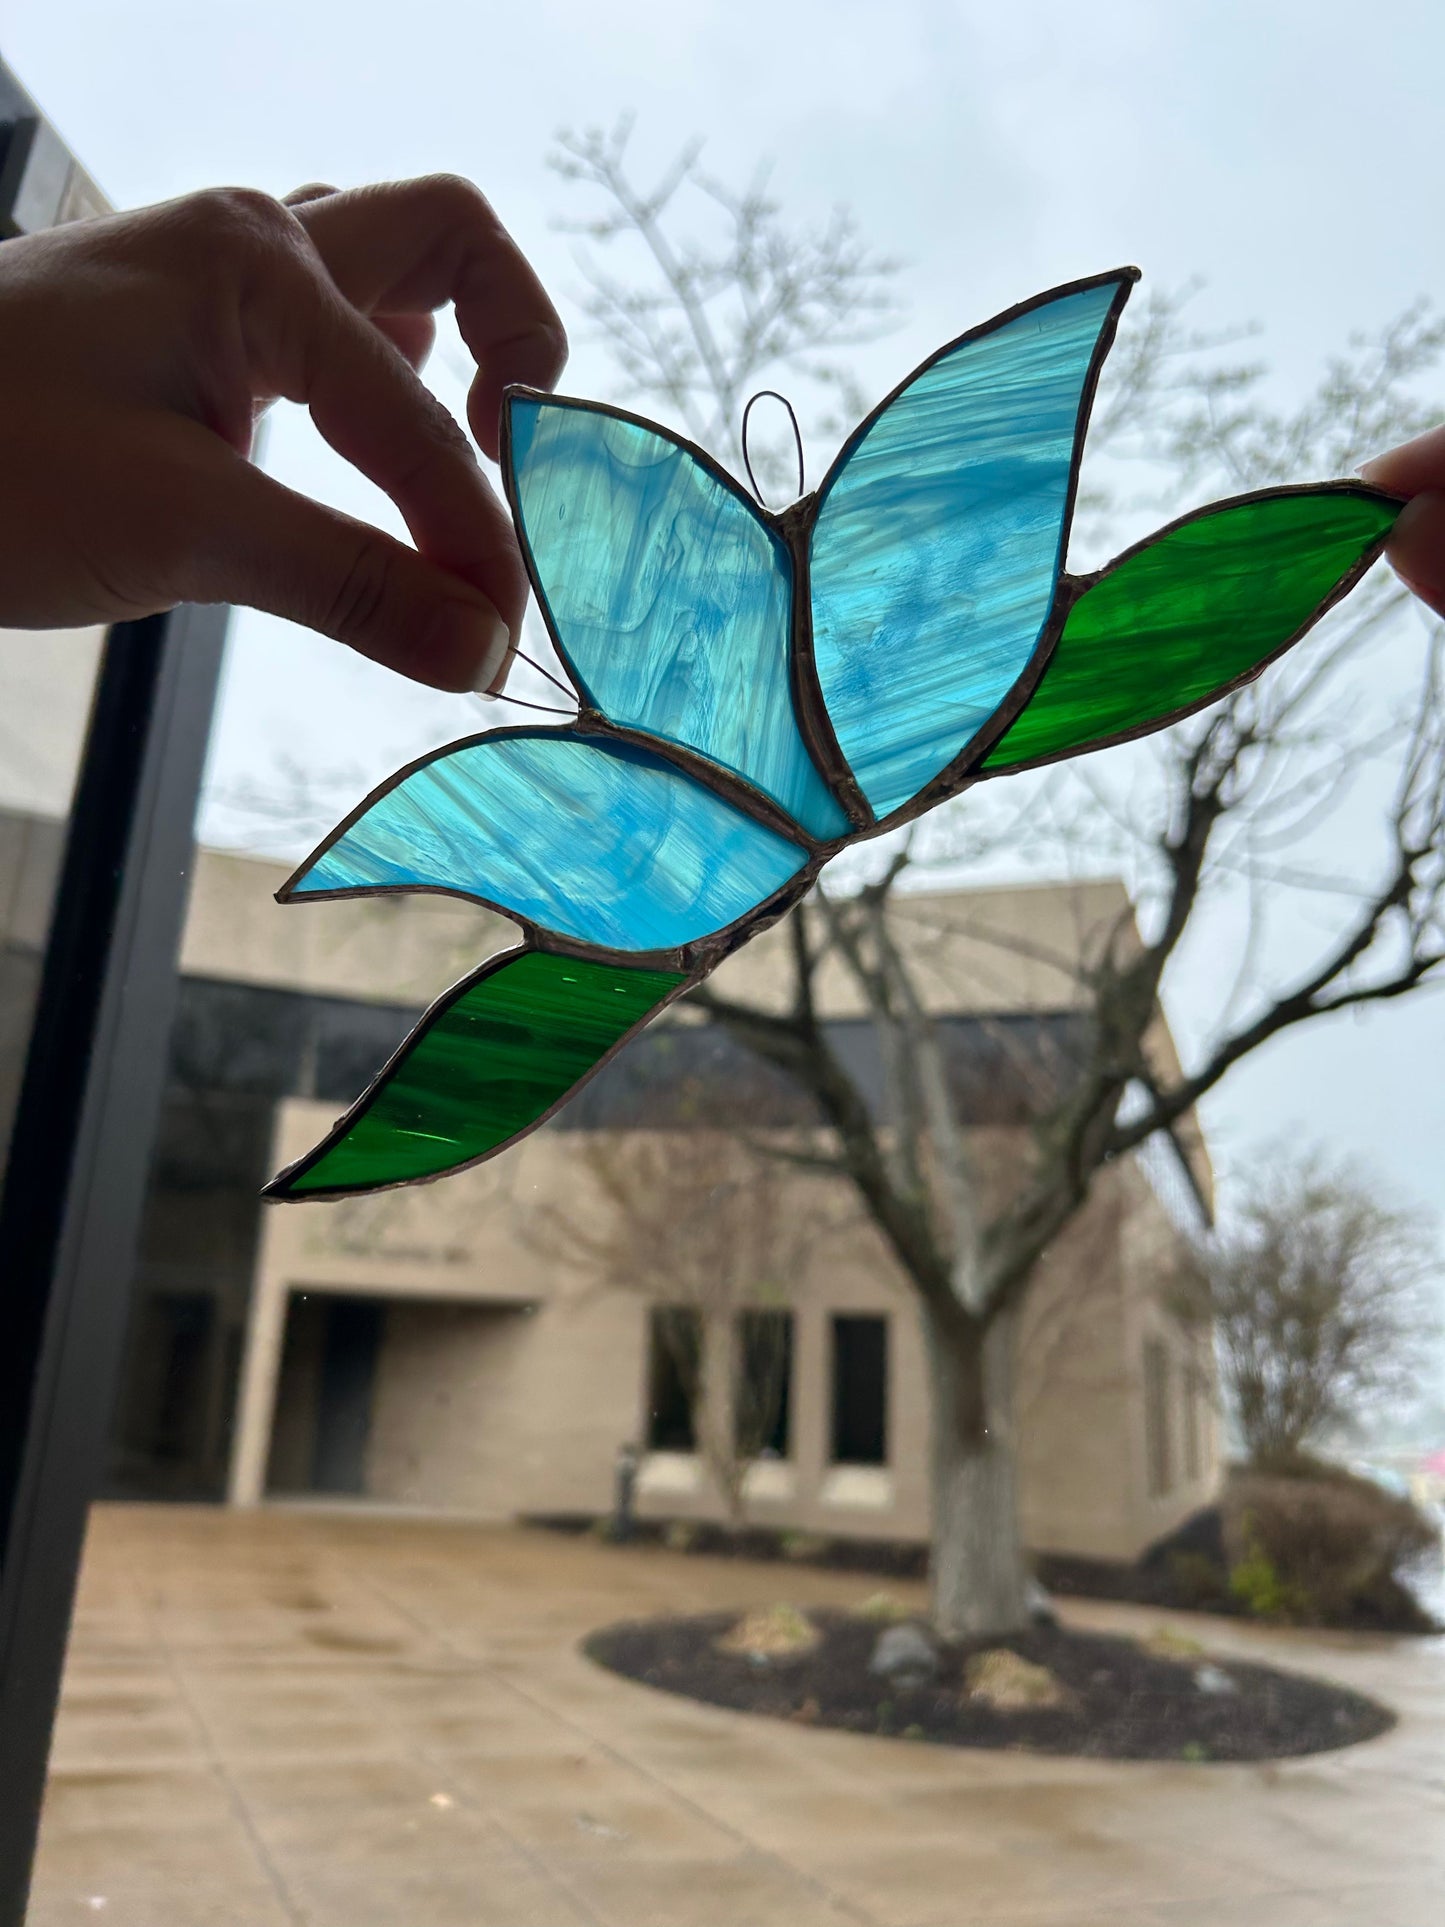 Beginner Stained Glass class, March 30, 3-6:00 pm